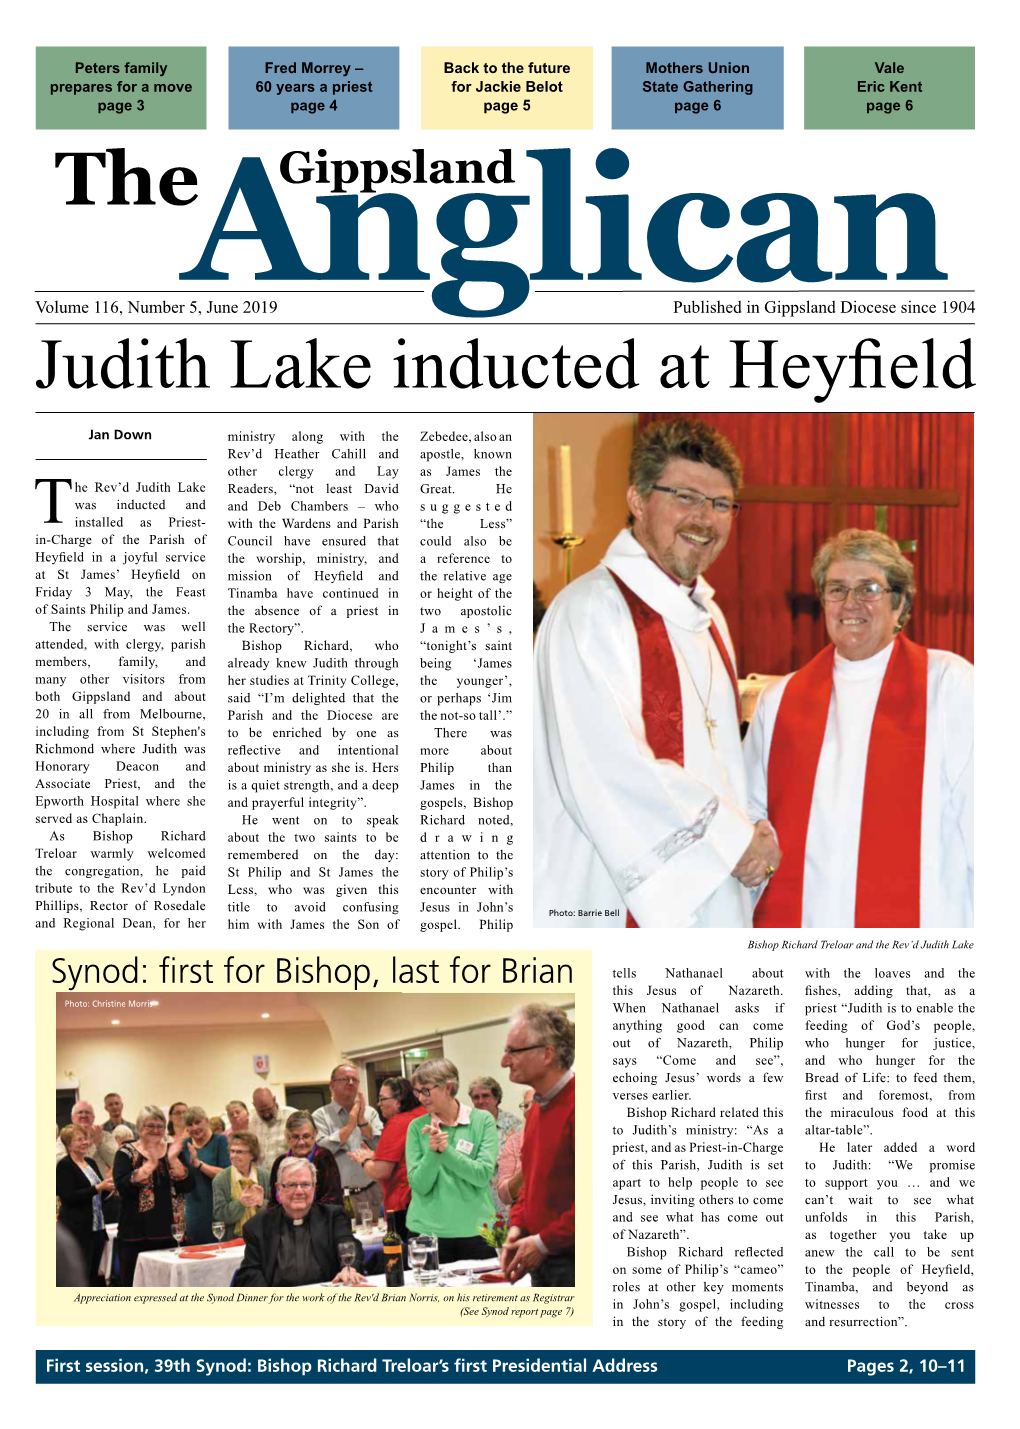 Judith Lake Inducted at Heyfield